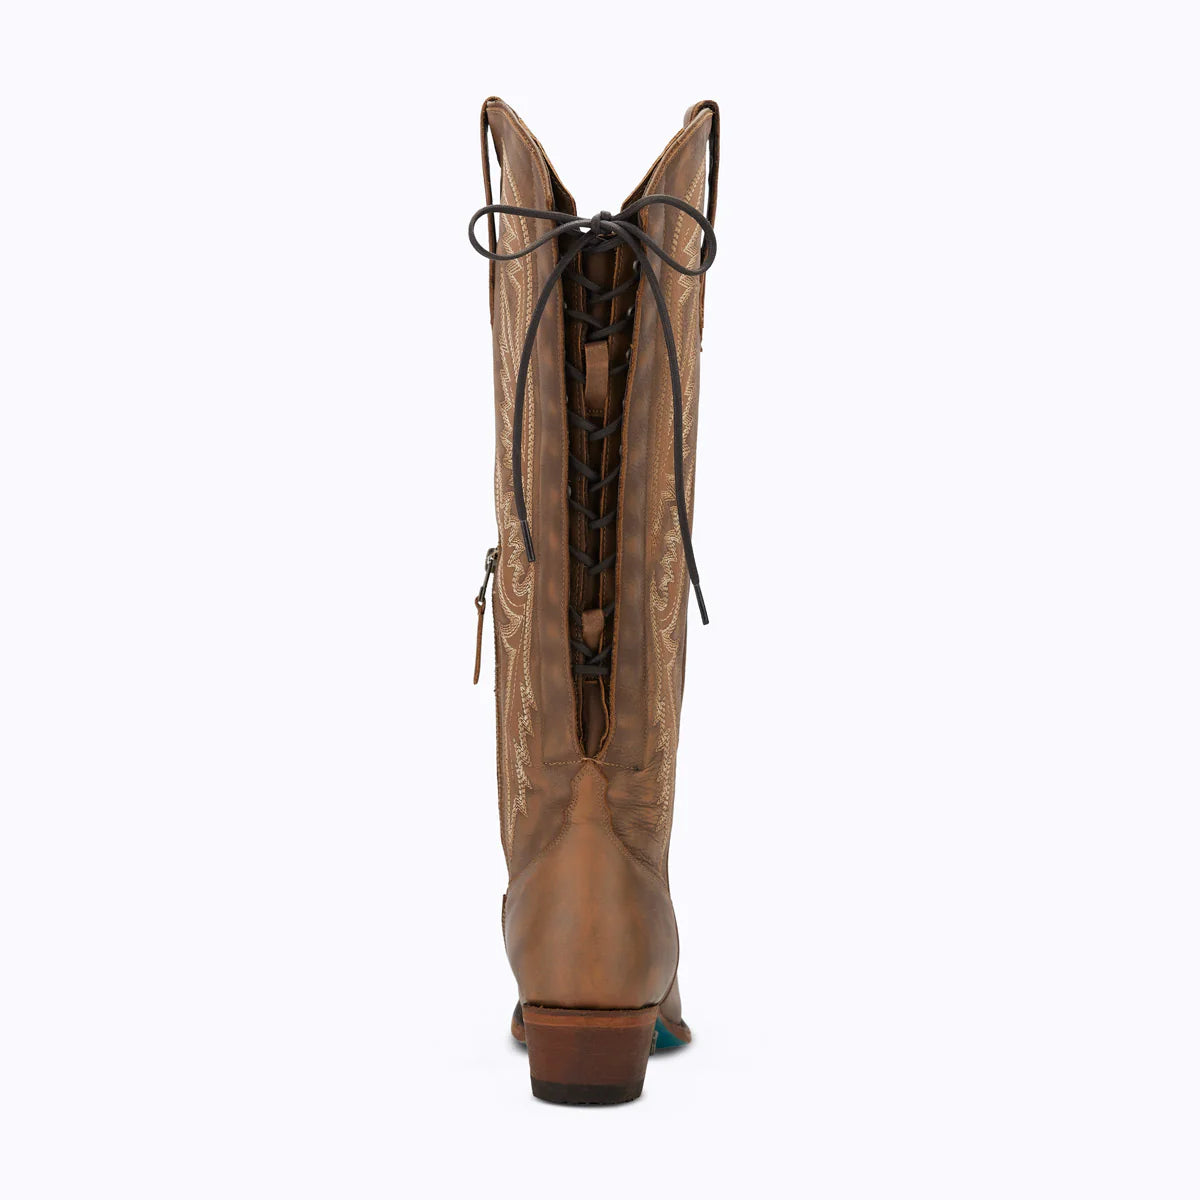 LANE "MONICA" TALL LACE-UP BOOTS in OILED SADDLE